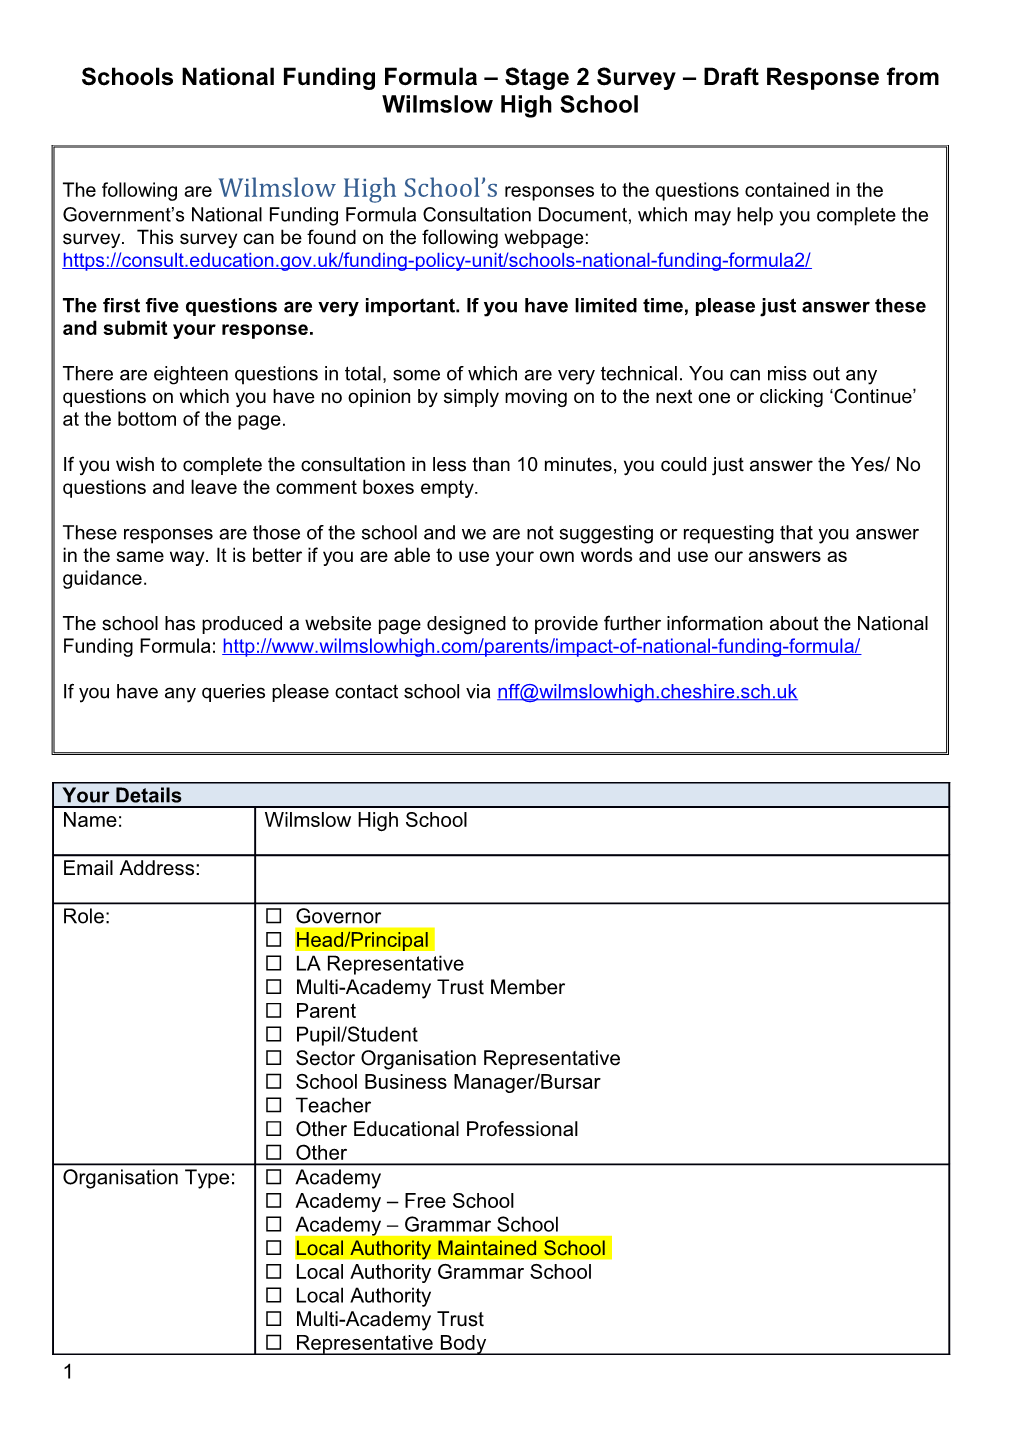 Schools National Funding Formula Stage 2 Survey Draft Response from Wilmslow High School